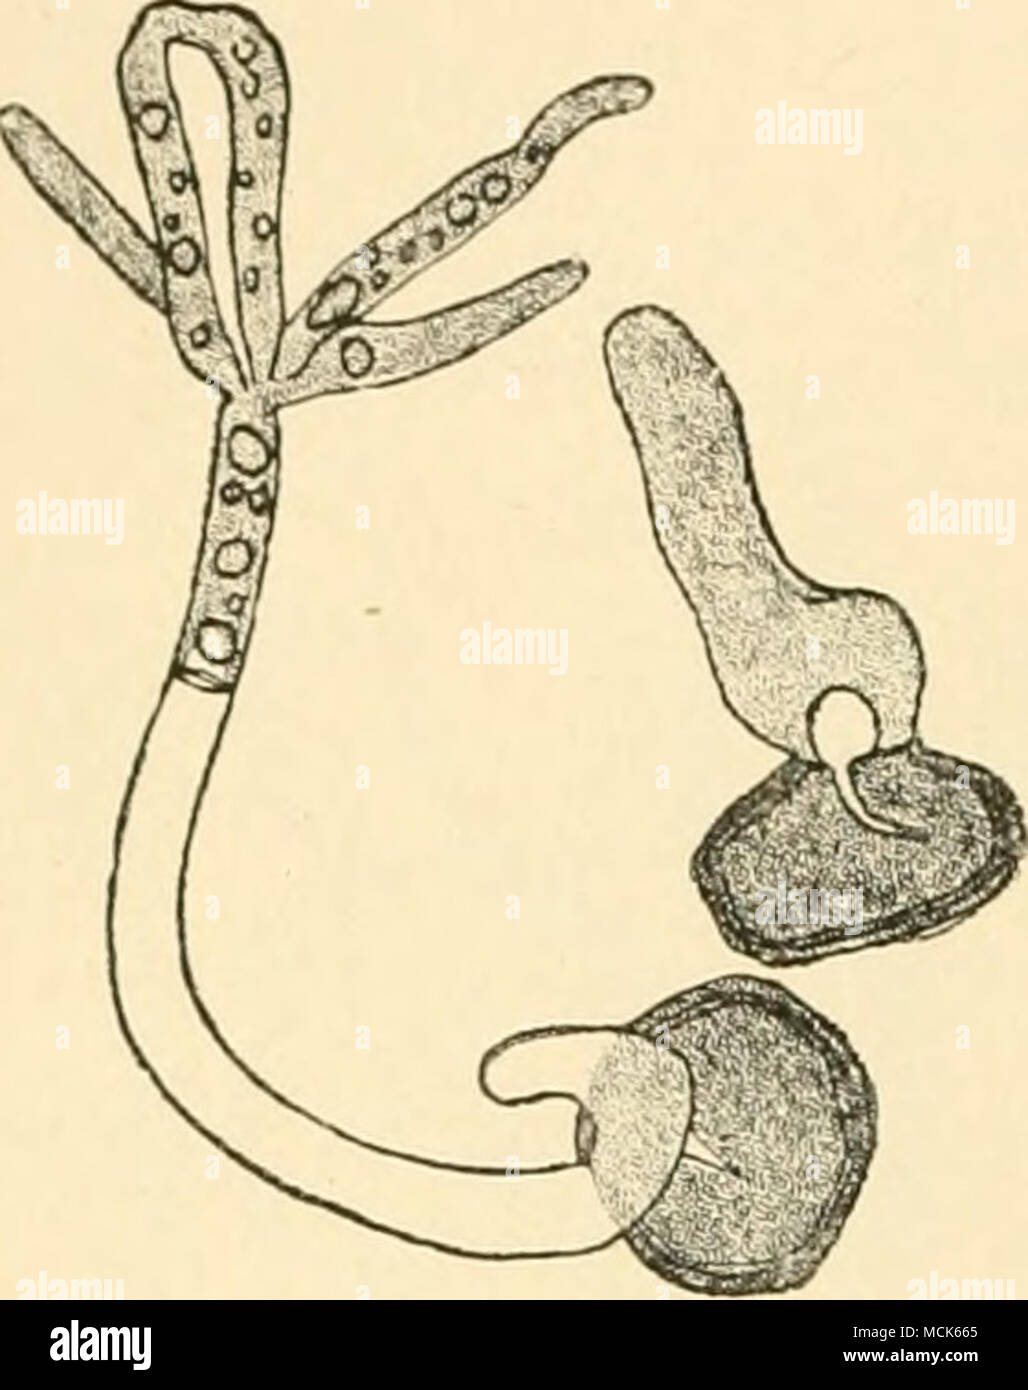 . Fio. 171.—Mclaaotatiiiuin endo&lt;/citvm. Germinating spores. One has already produced a promycelium with a whorl of five branches, of which two have fused. (After Woronin.) Urocystis. Spores massed into balls, consisting of several spores sur- rounded by smaller companion-cells incapable of germination. The central spores are clearly distinguished from the others by their larger size, darker colour, and thicker coat. The balls of spores are developed inside coils of hyphae, which become entwined together and swell up in a gelatinous manner. The central spores on germination give rise to a p Stock Photo